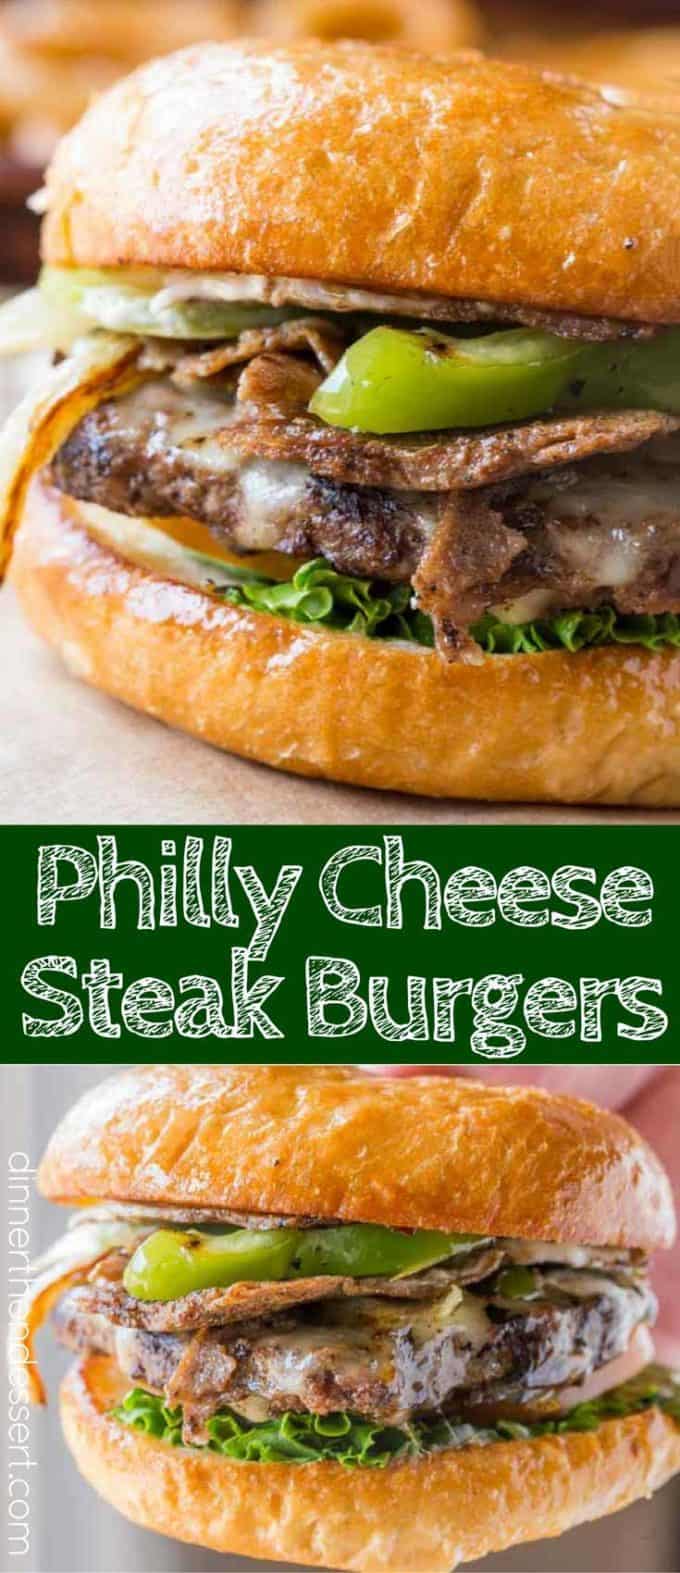 Philly Cheese Steak Burgers are the perfect cookout burger that friends and family will love!